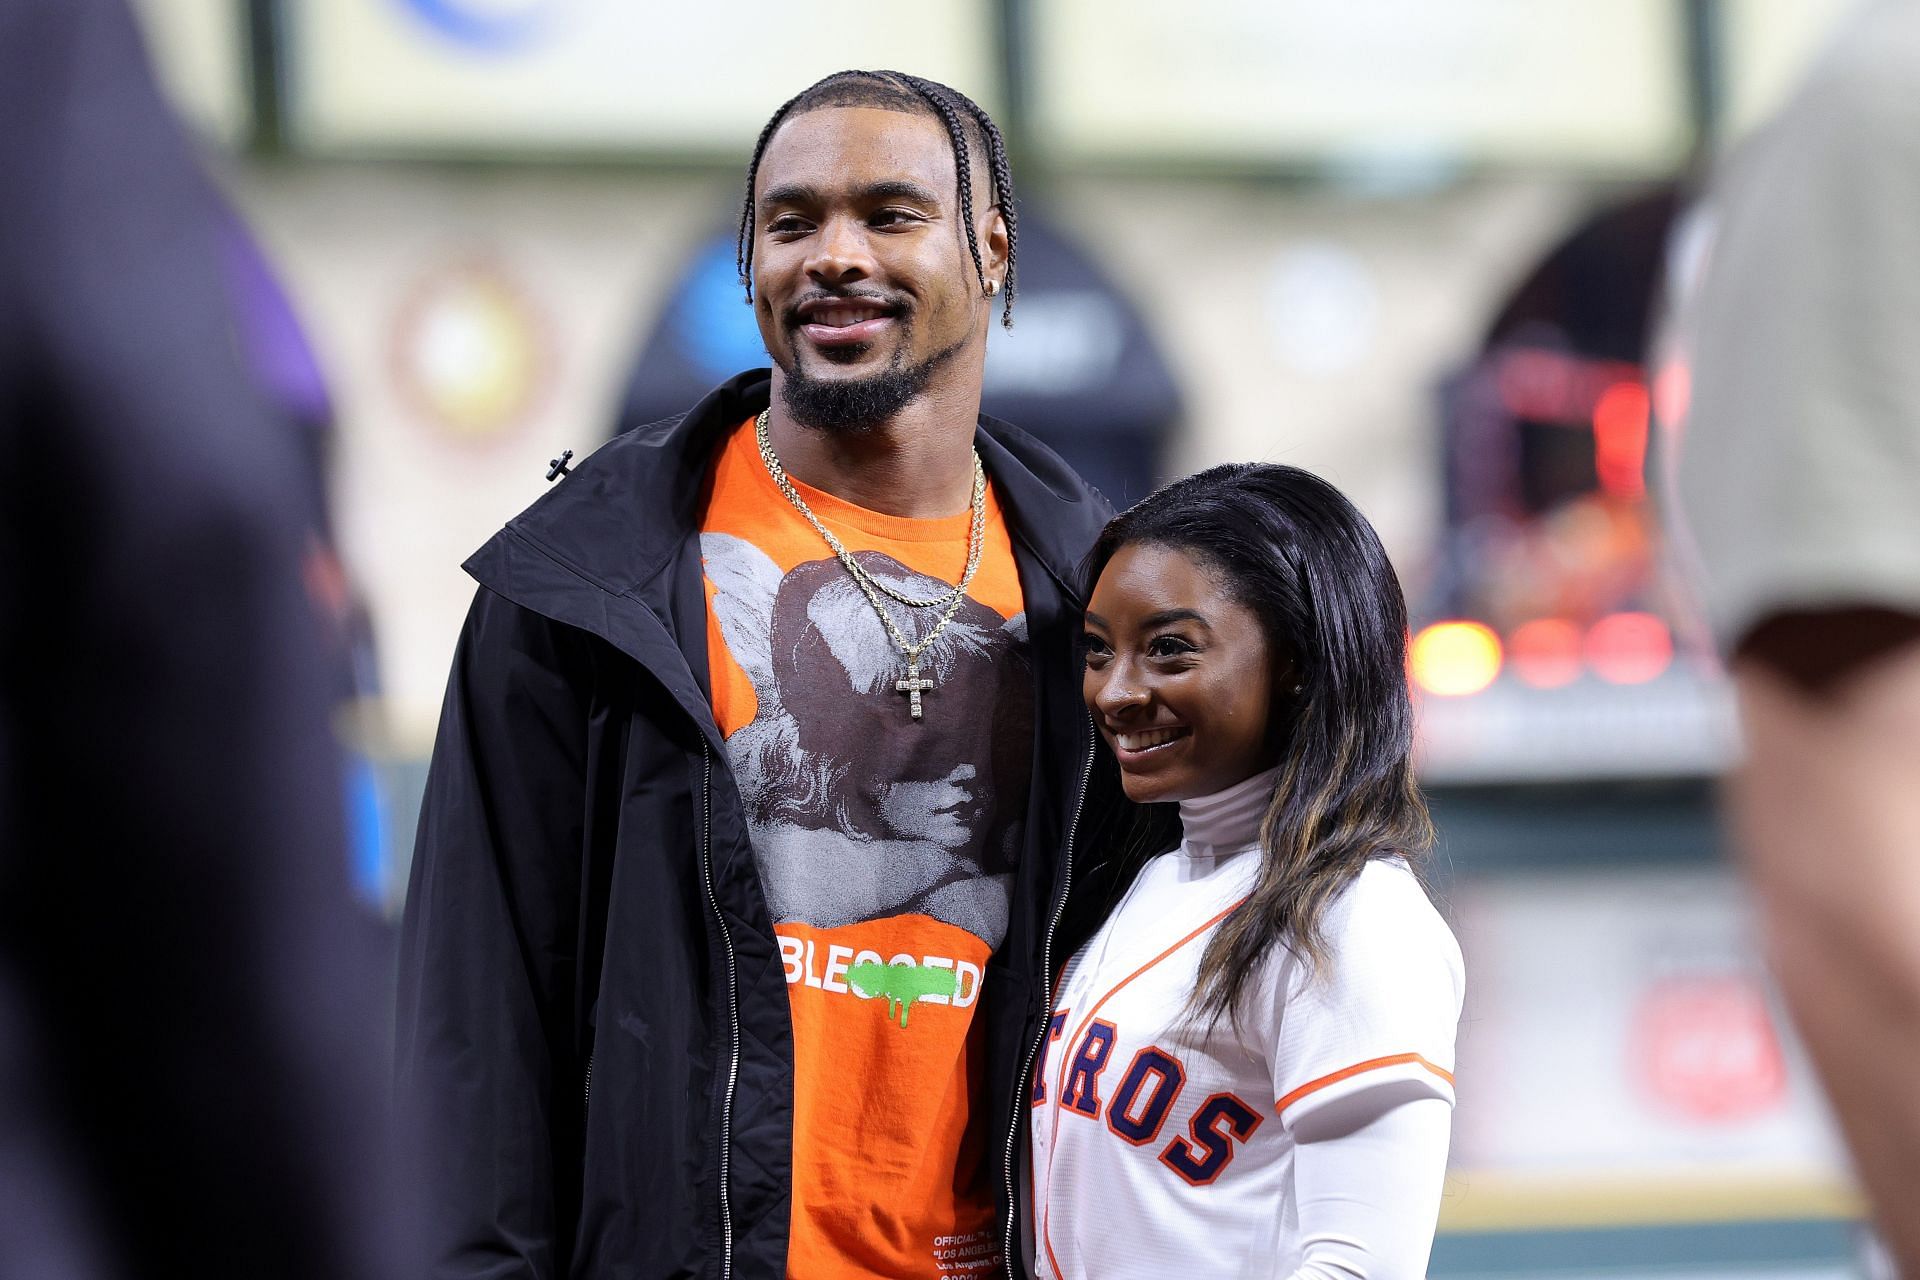 Simone Biles and Jonathan Owens pose on the field prior to Game One of the 2022 World Series between the Philadelphia Phillies and the Houston Astros at Minute Maid Park on October 28, 2022 in Houston, Texas. (Photo by Carmen Mandato/Getty Images)